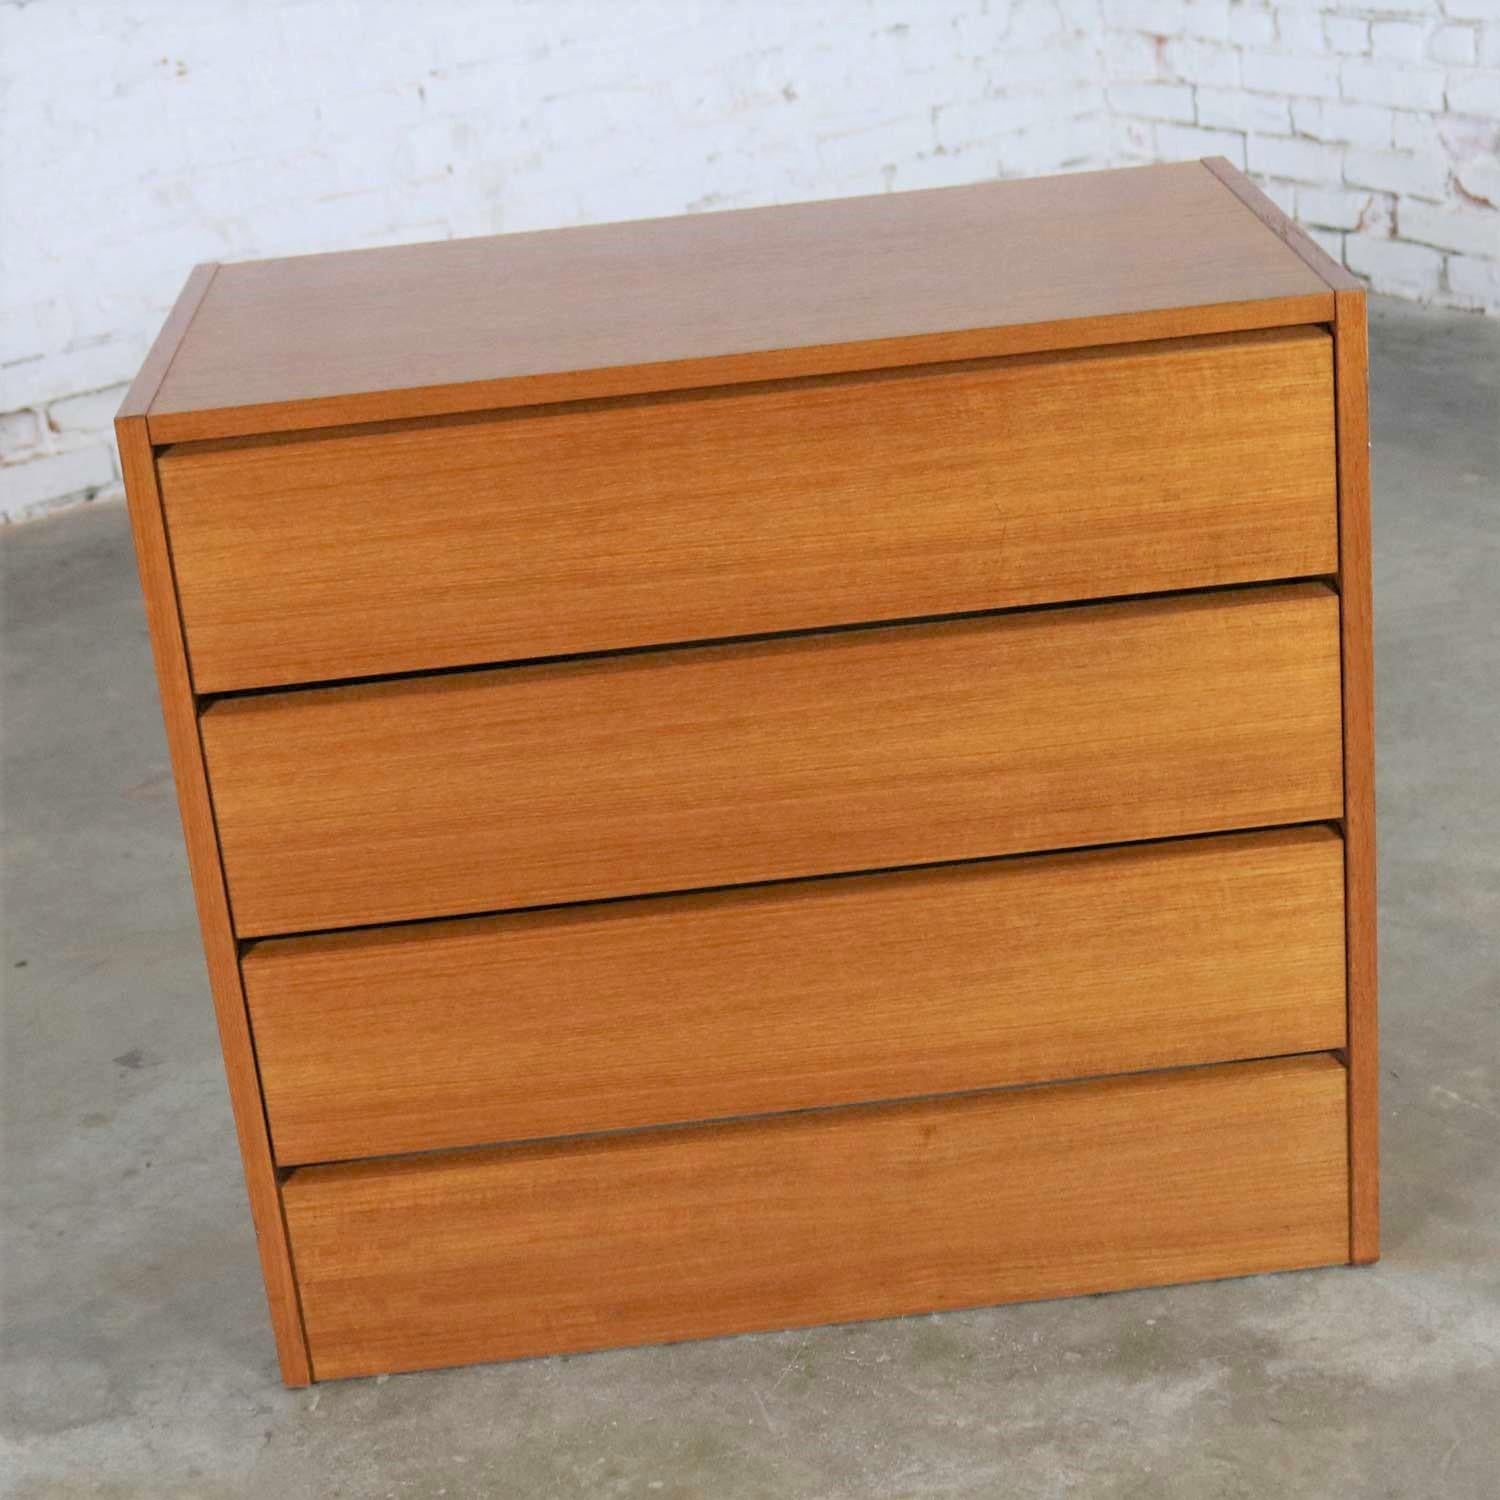 Handsome small Scandinavian Modern teak three-drawer chest marked made in Denmark. It is in wonderful vintage condition with no outstanding flaws that we have detected. Please see photos, circa 1970s-1980s.

Sometimes you just need a perfect small